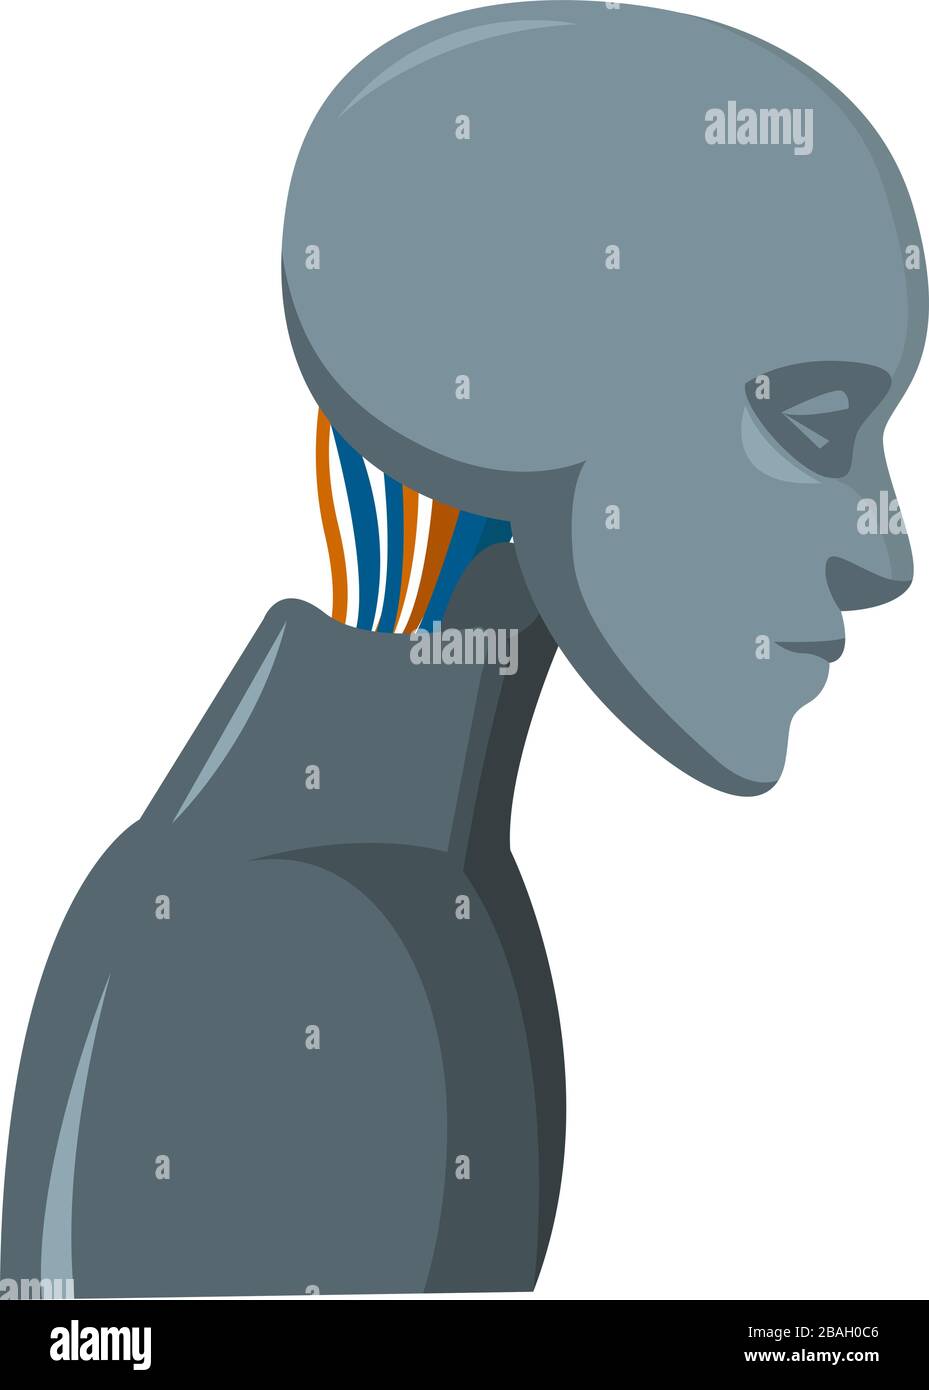 Robot with wires, illustration, vector on white background Stock Vector